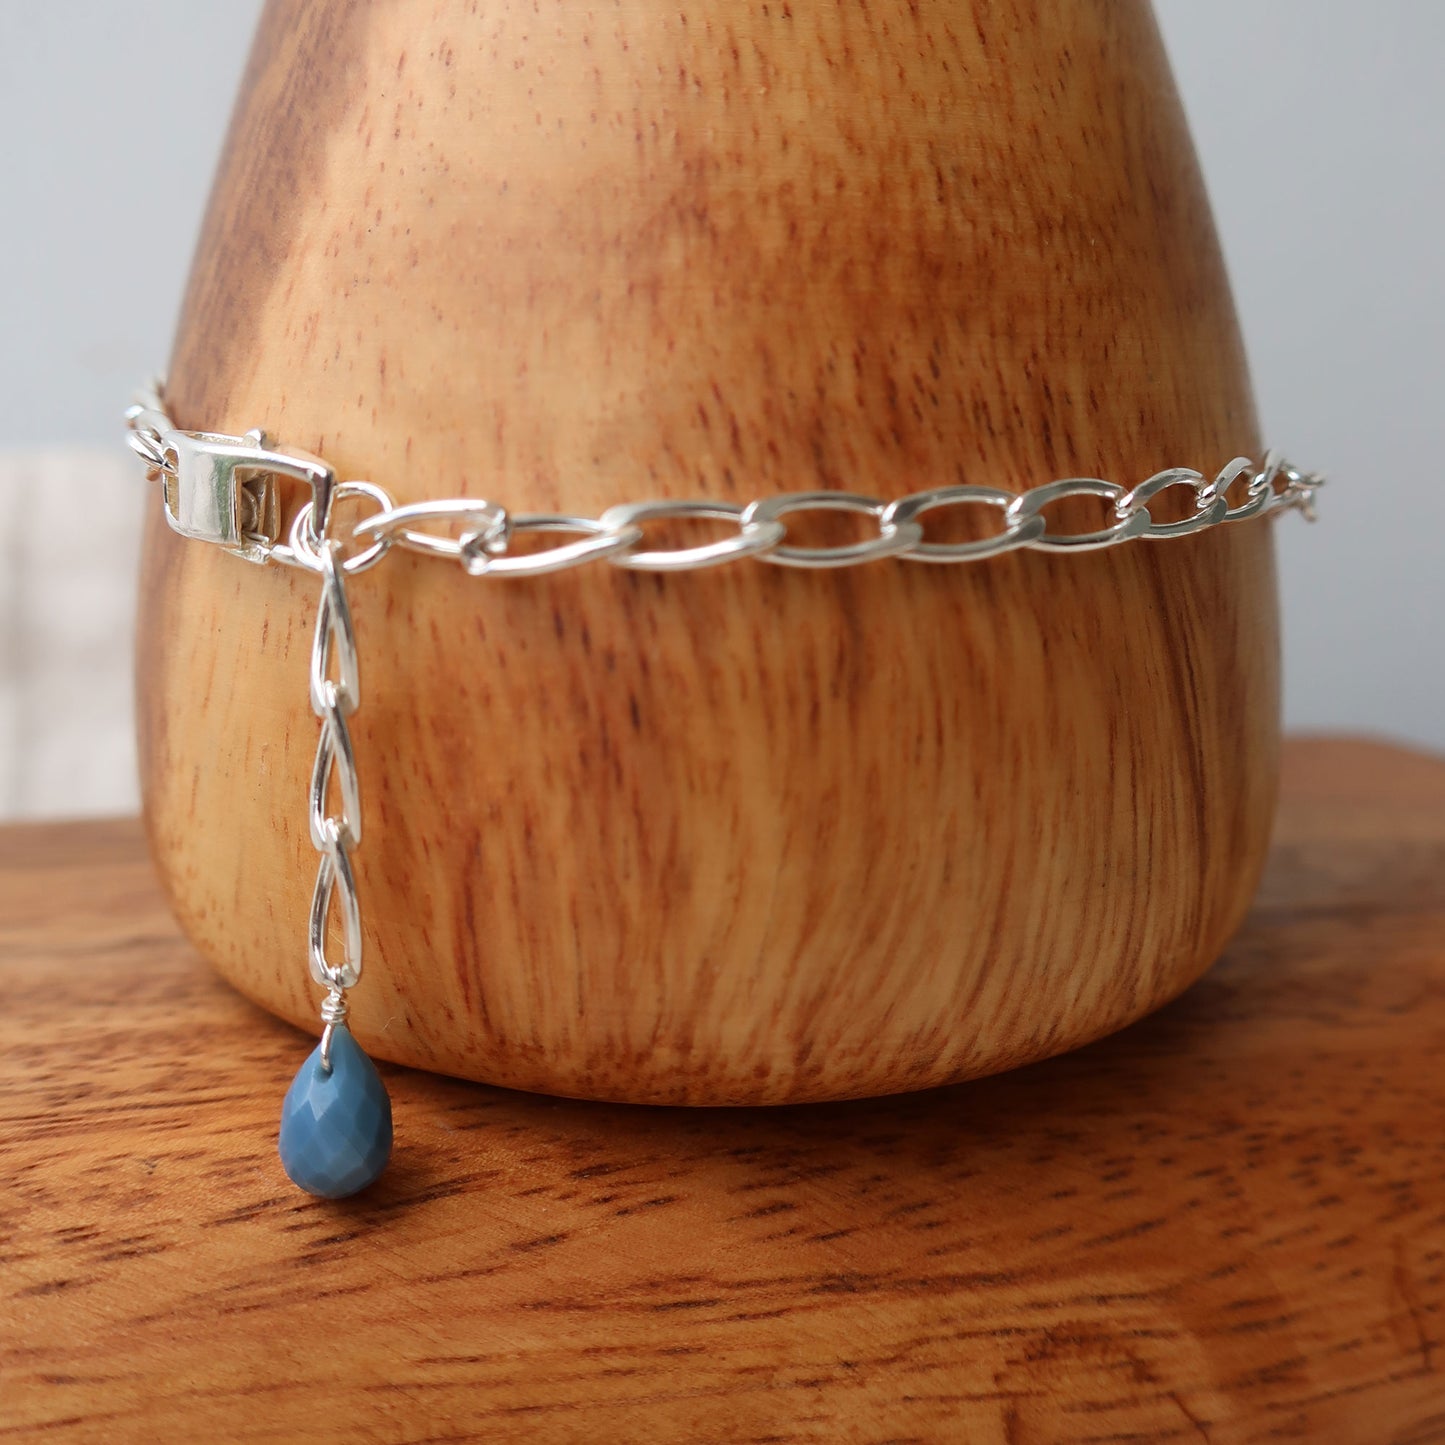 Twisted Cable Anklet with Peruvian Blue Opal